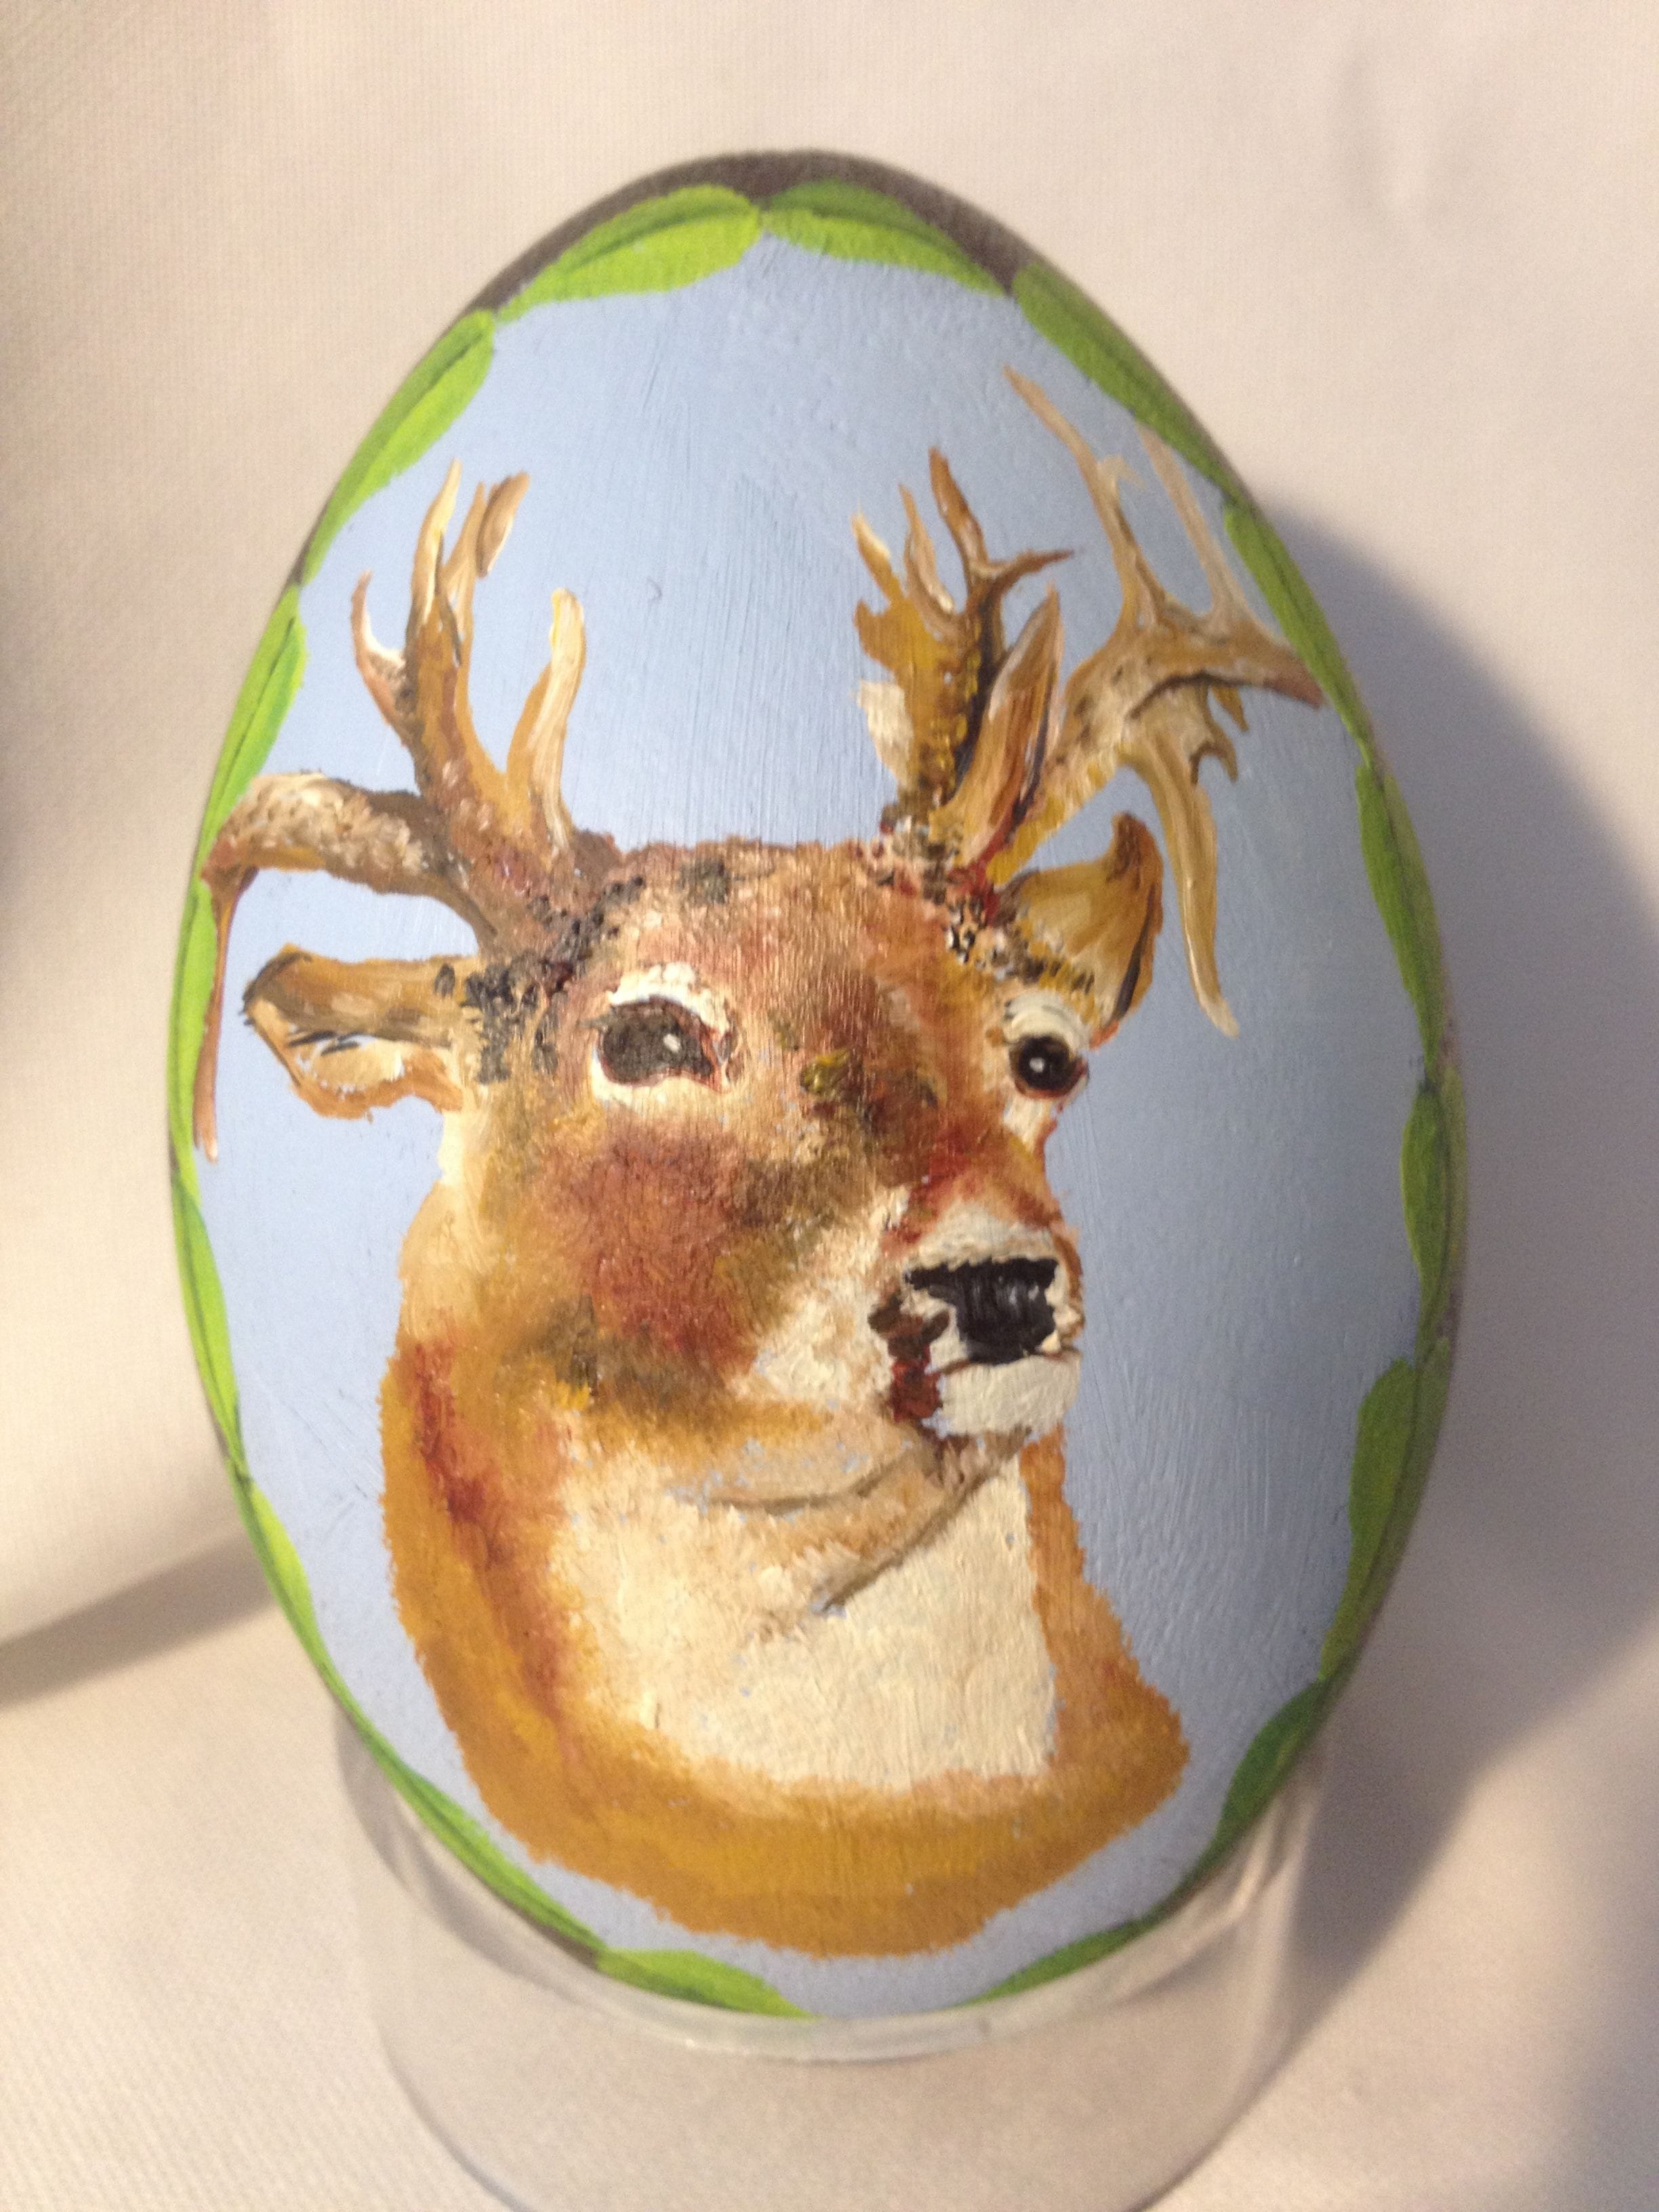 Oil paint on emu egg of close up of buck.$40.